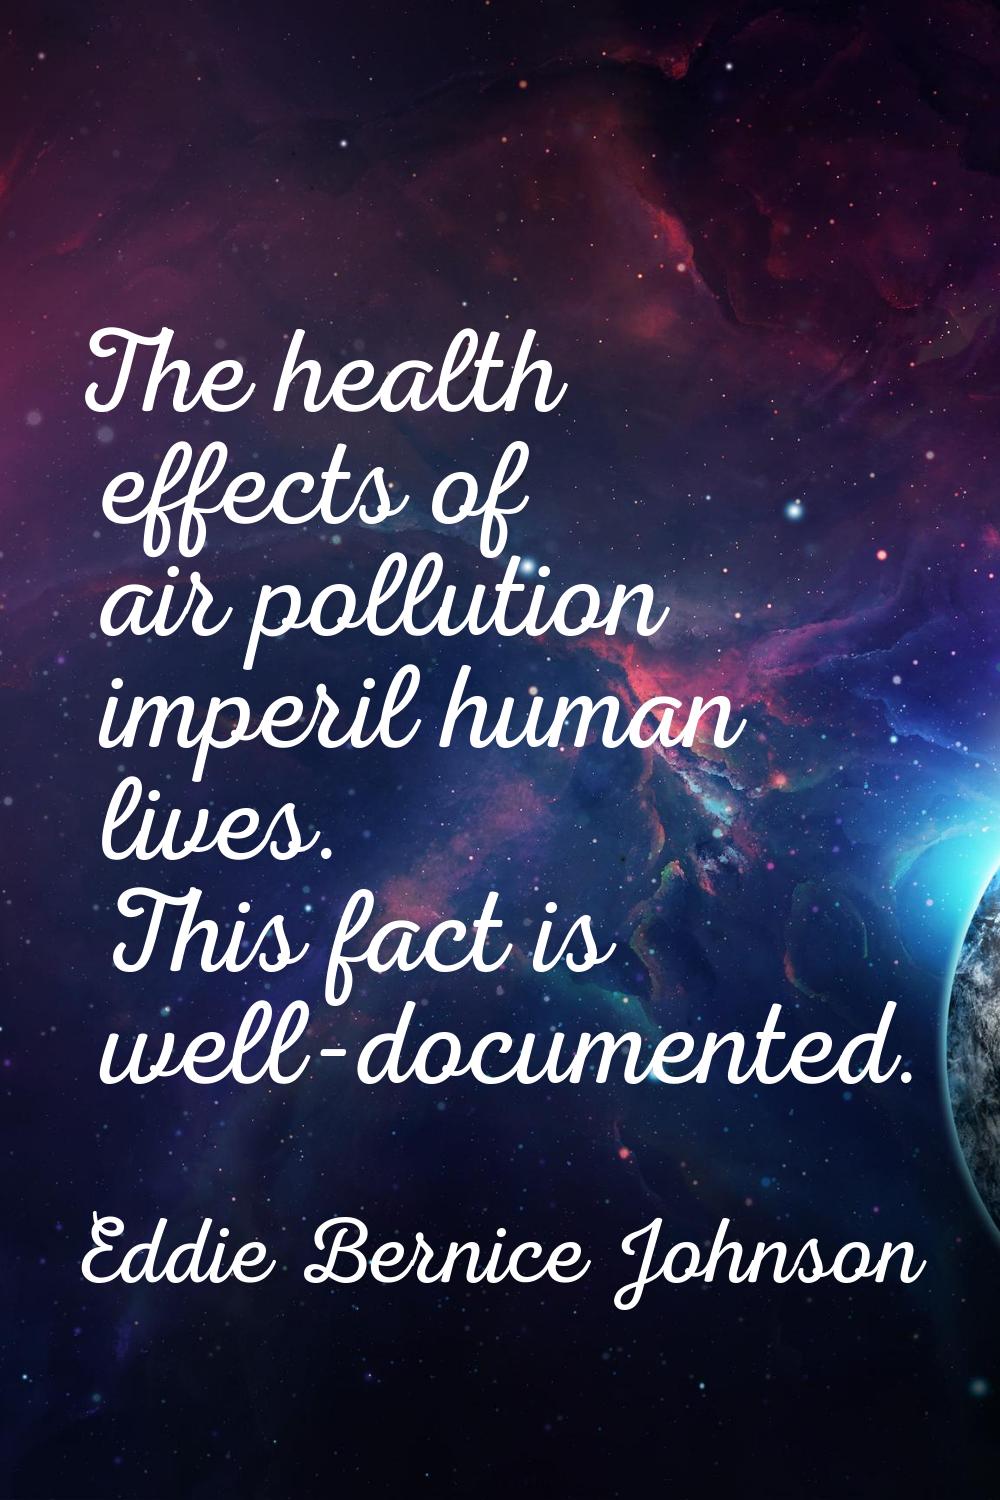 The health effects of air pollution imperil human lives. This fact is well-documented.